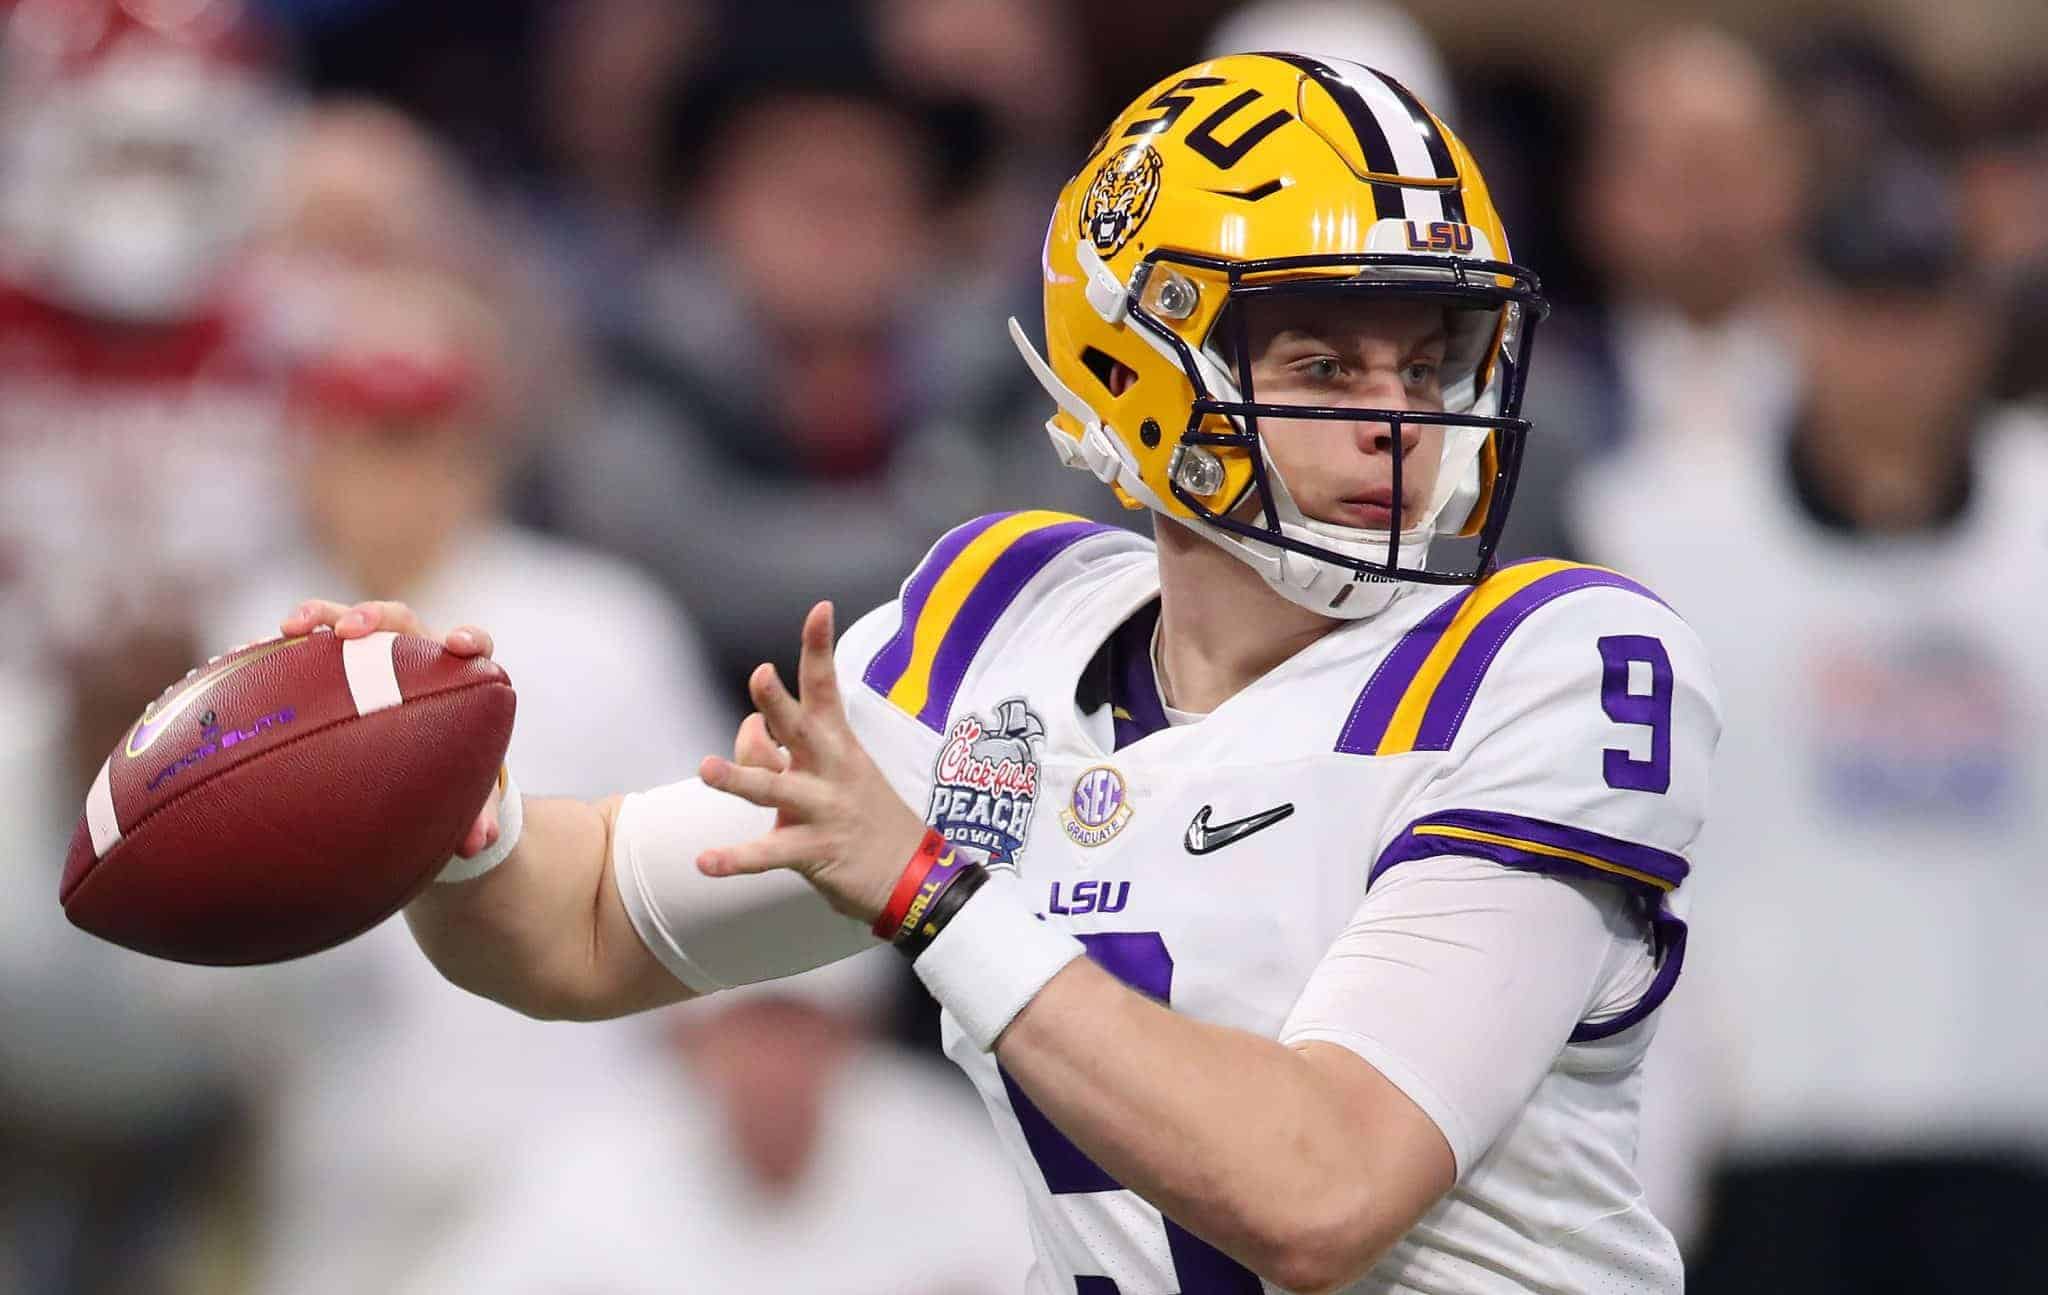 ATLANTA, GEORGIA - DECEMBER 28: Joe Burrow #9 of the LSU Tigers plays against the Oklahoma Sooners during the College Football Playoff Semifinal in the Chick-fil-A Peach Bowl at Mercedes-Benz Stadium on December 28, 2019 in Atlanta, Georgia. NFL Draft